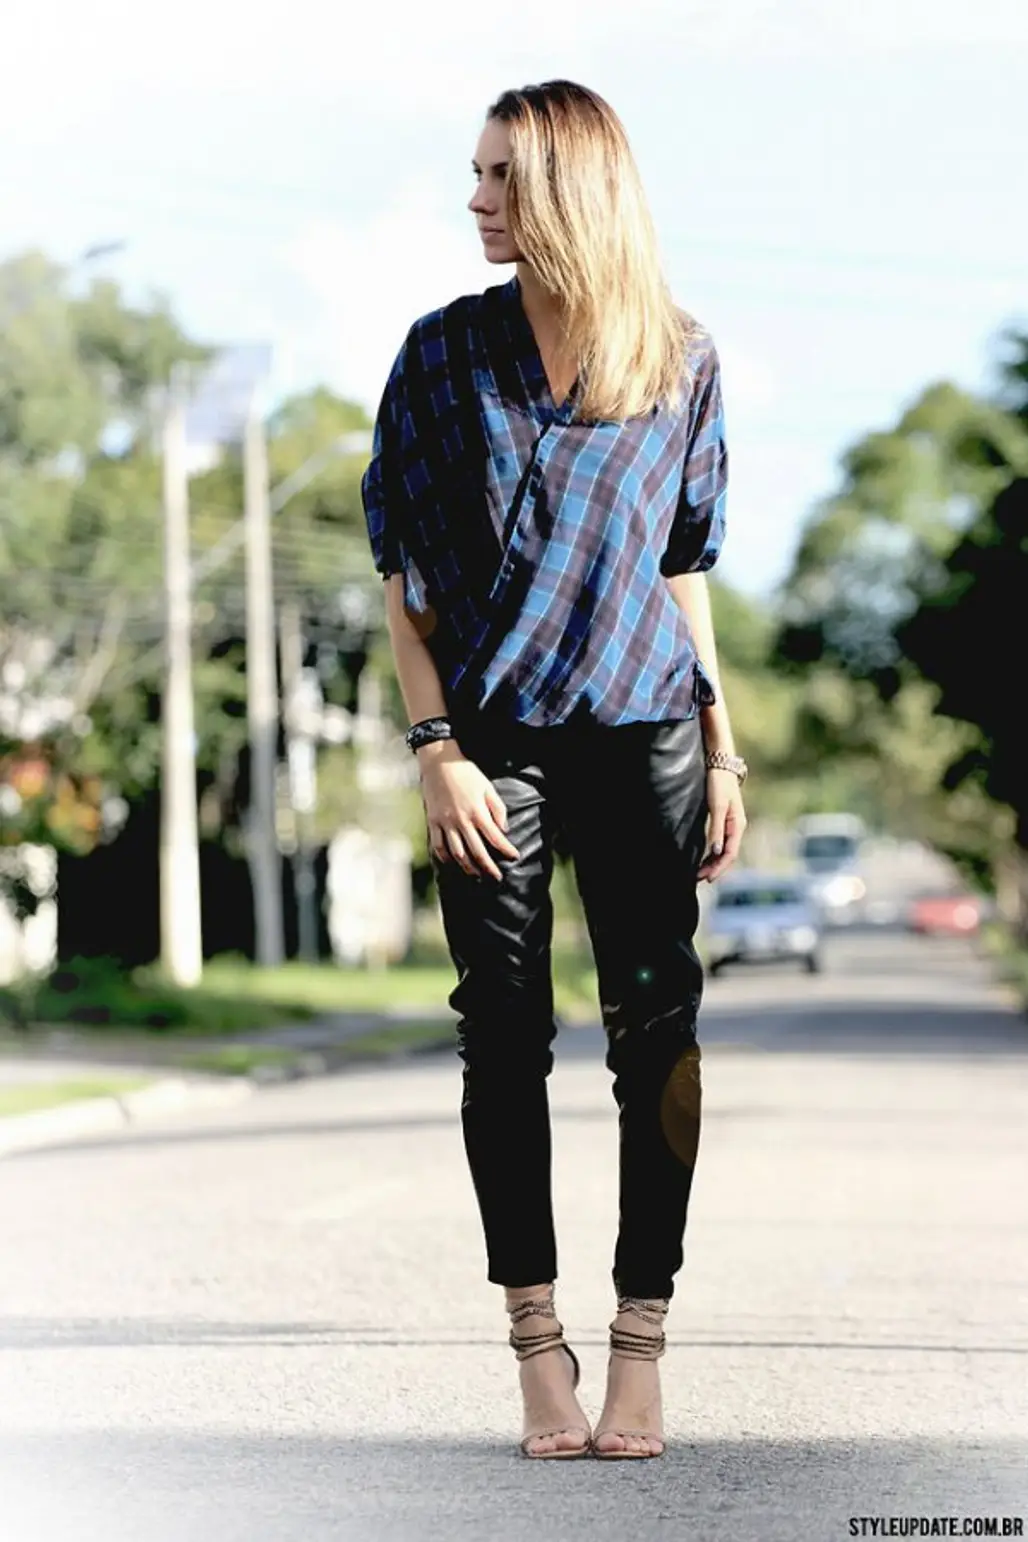 Paired with a Slouchy Shirt and Heels